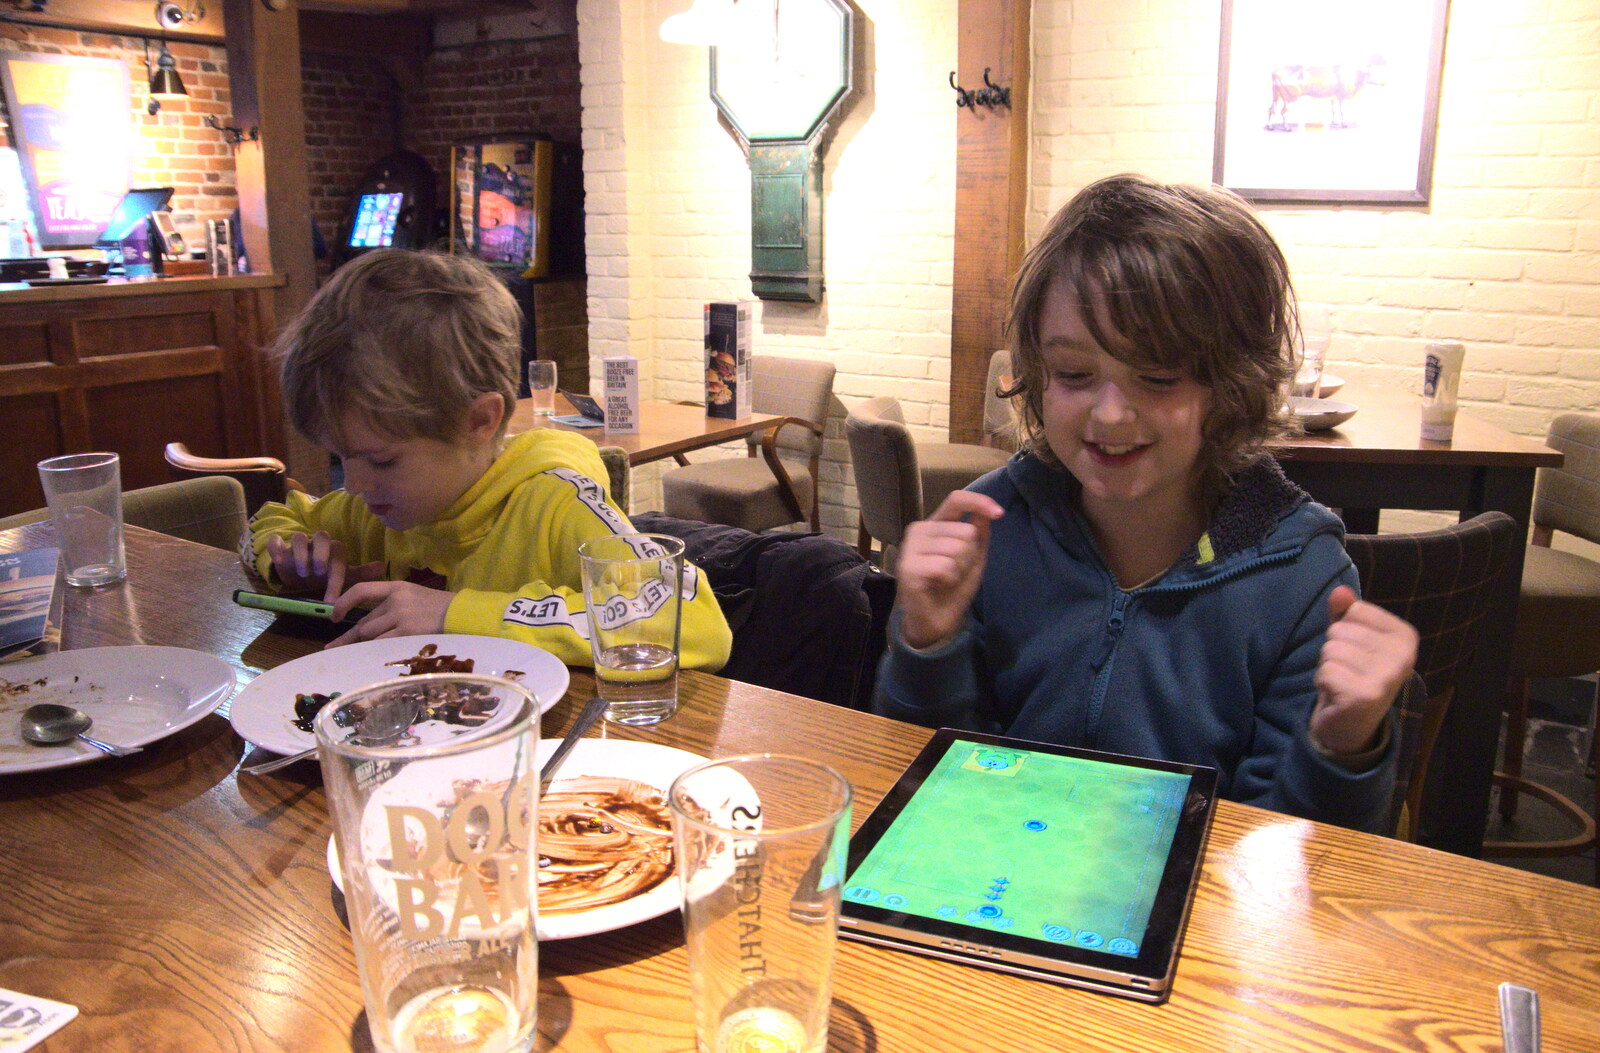 Harry and Fred are on devices again from A Trip to Harry Potter World, Leavesden, Hertfordshire - 16th February 2020